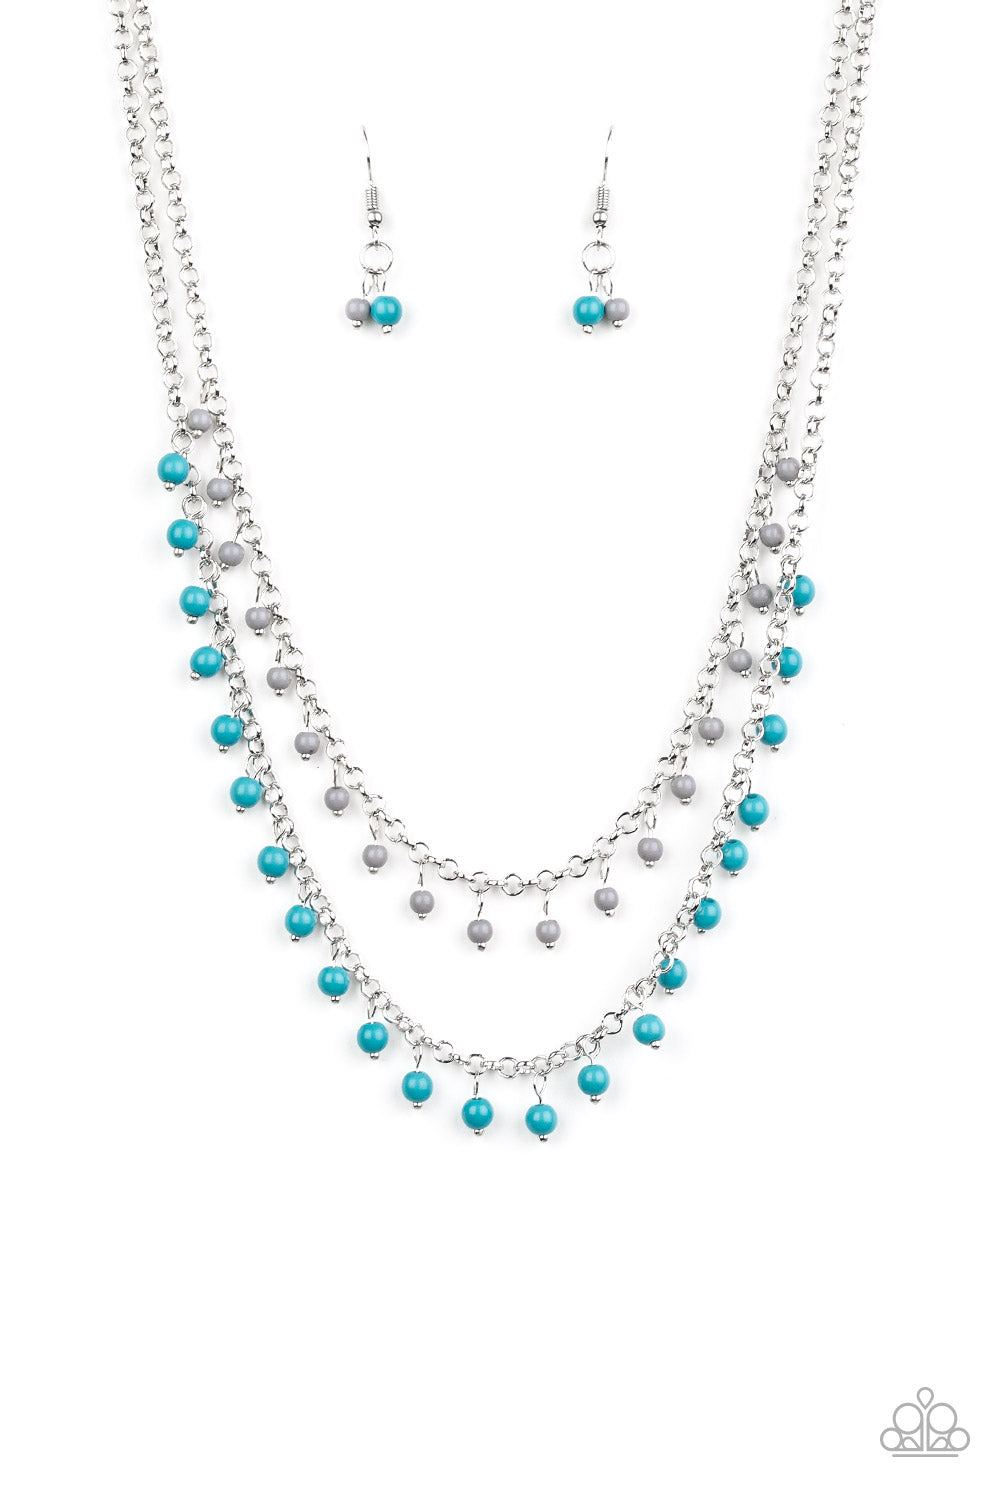 Dainty Distraction - Paparazzi - Blue Grey Bead Short Layered Necklace